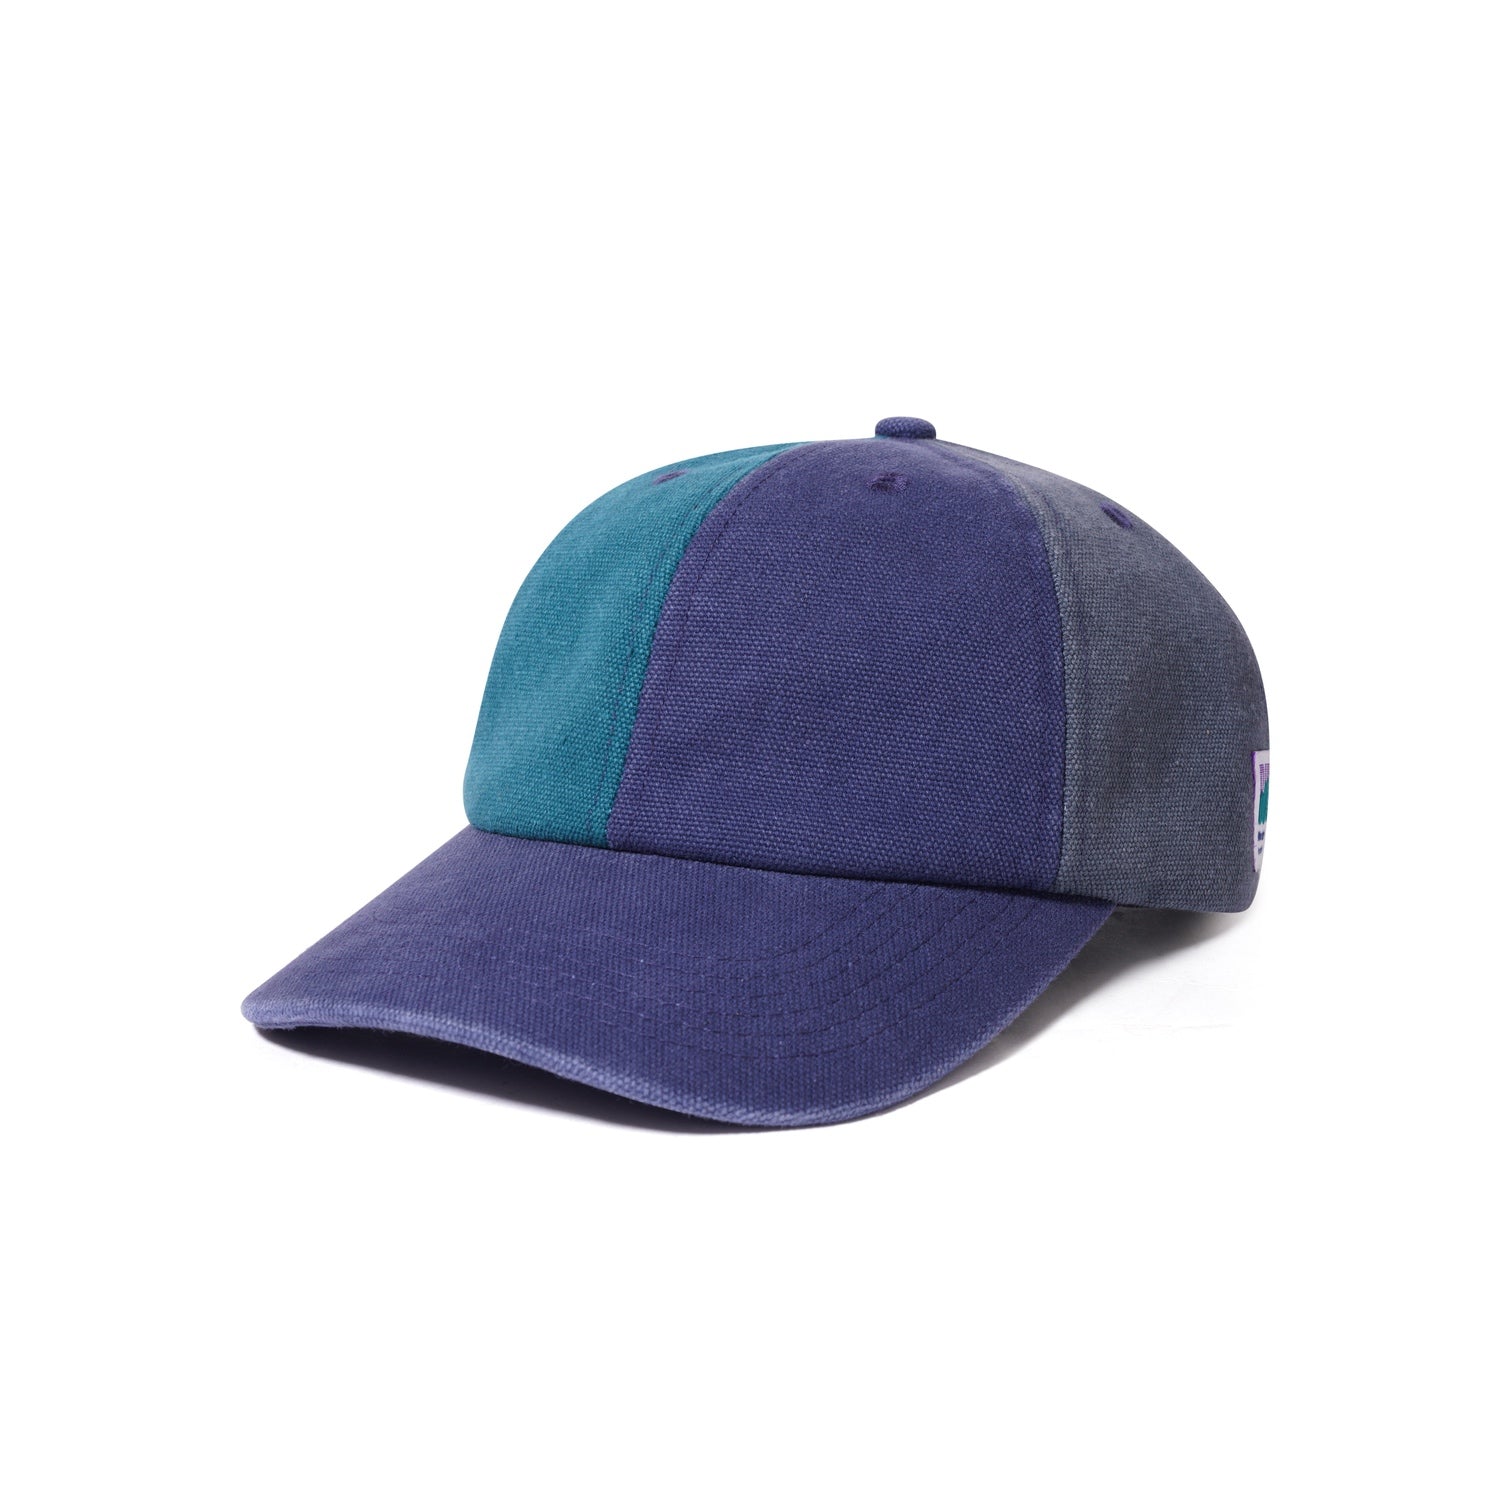 Canvas Patchwork 6 Panel Cap, Washed Navy